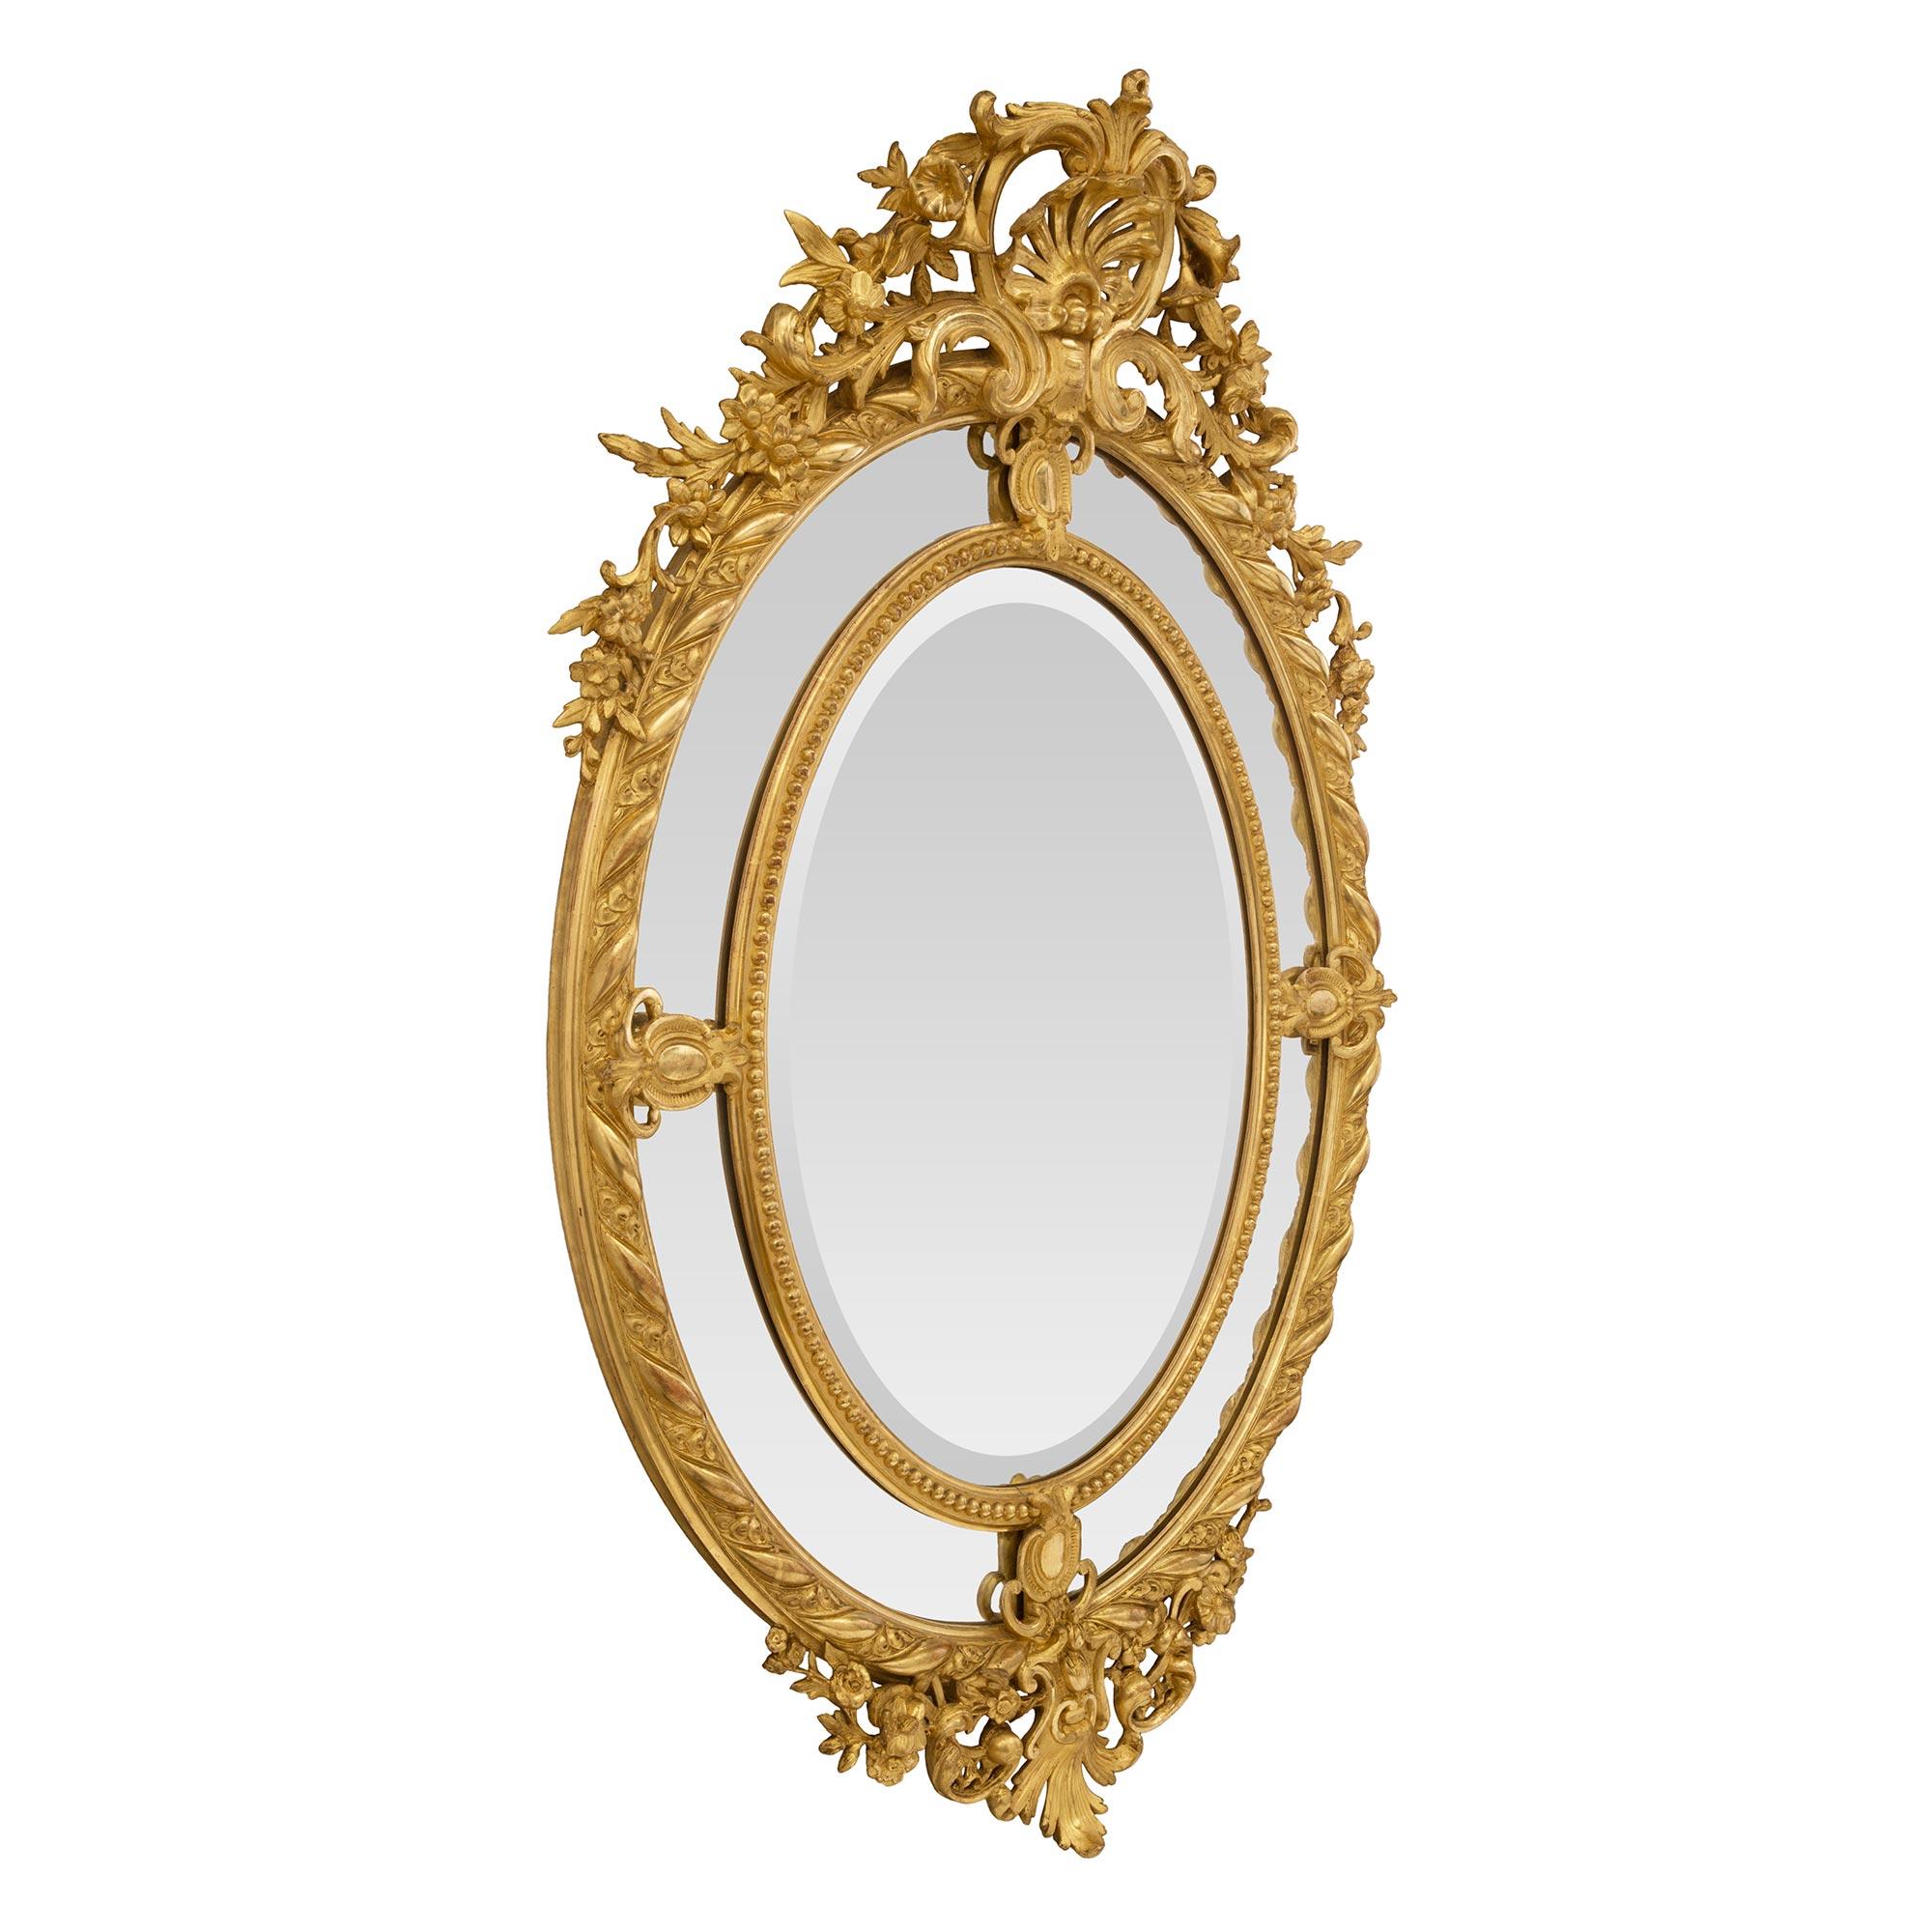 A striking and high quality French 19th century Louis XV st. double framed oval giltwood mirror. The original central beveled mirror plate is framed within a fine beaded band. The four original outer mirror plates are separated by lovely pierced